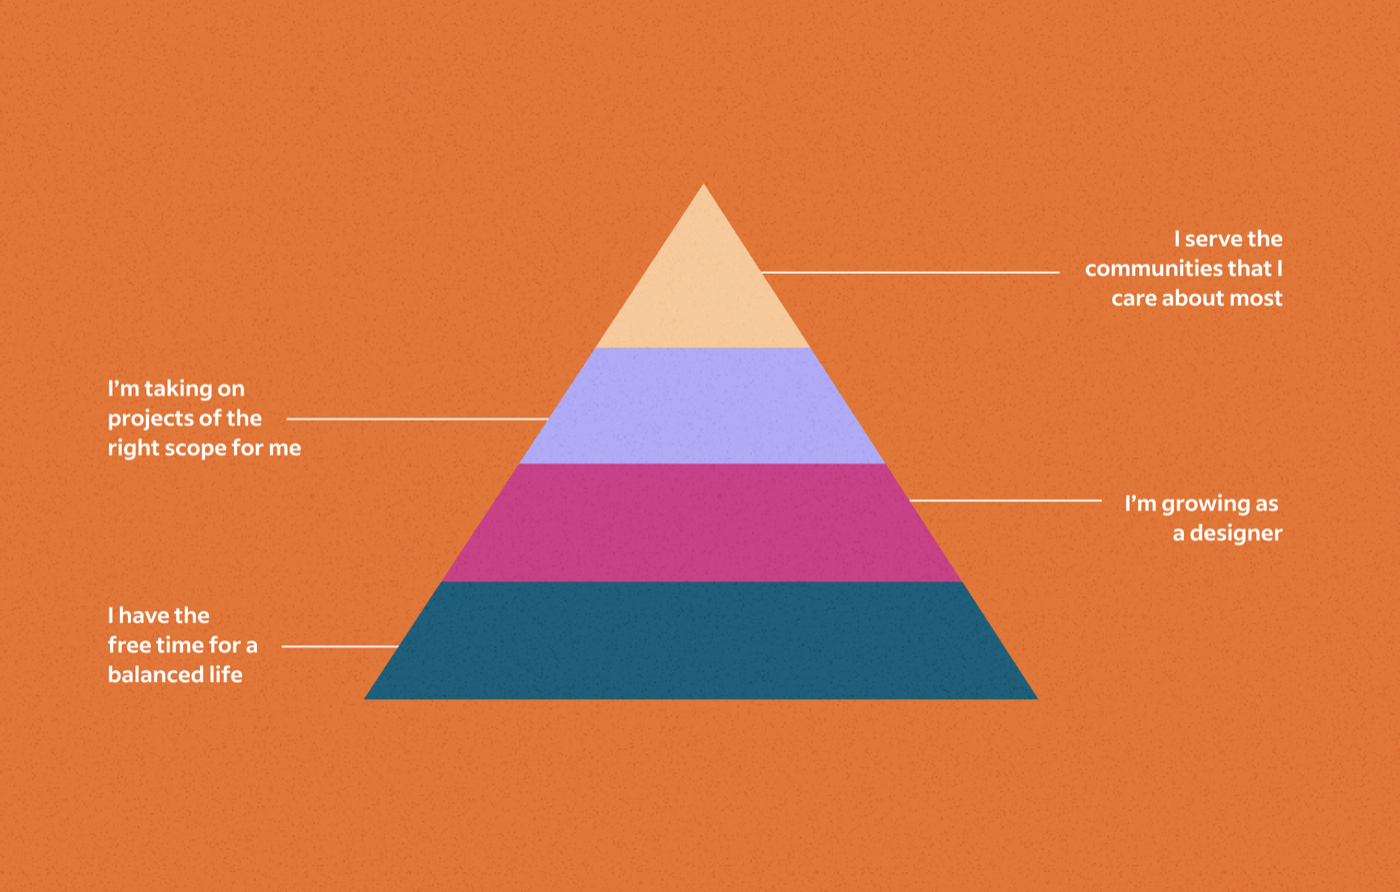 Triangular hierarchy of website builder career needs with life balance at the base, career growth as the second level, taking projects of the right scope as the third level, and serving communities they care about as the highest-level need.